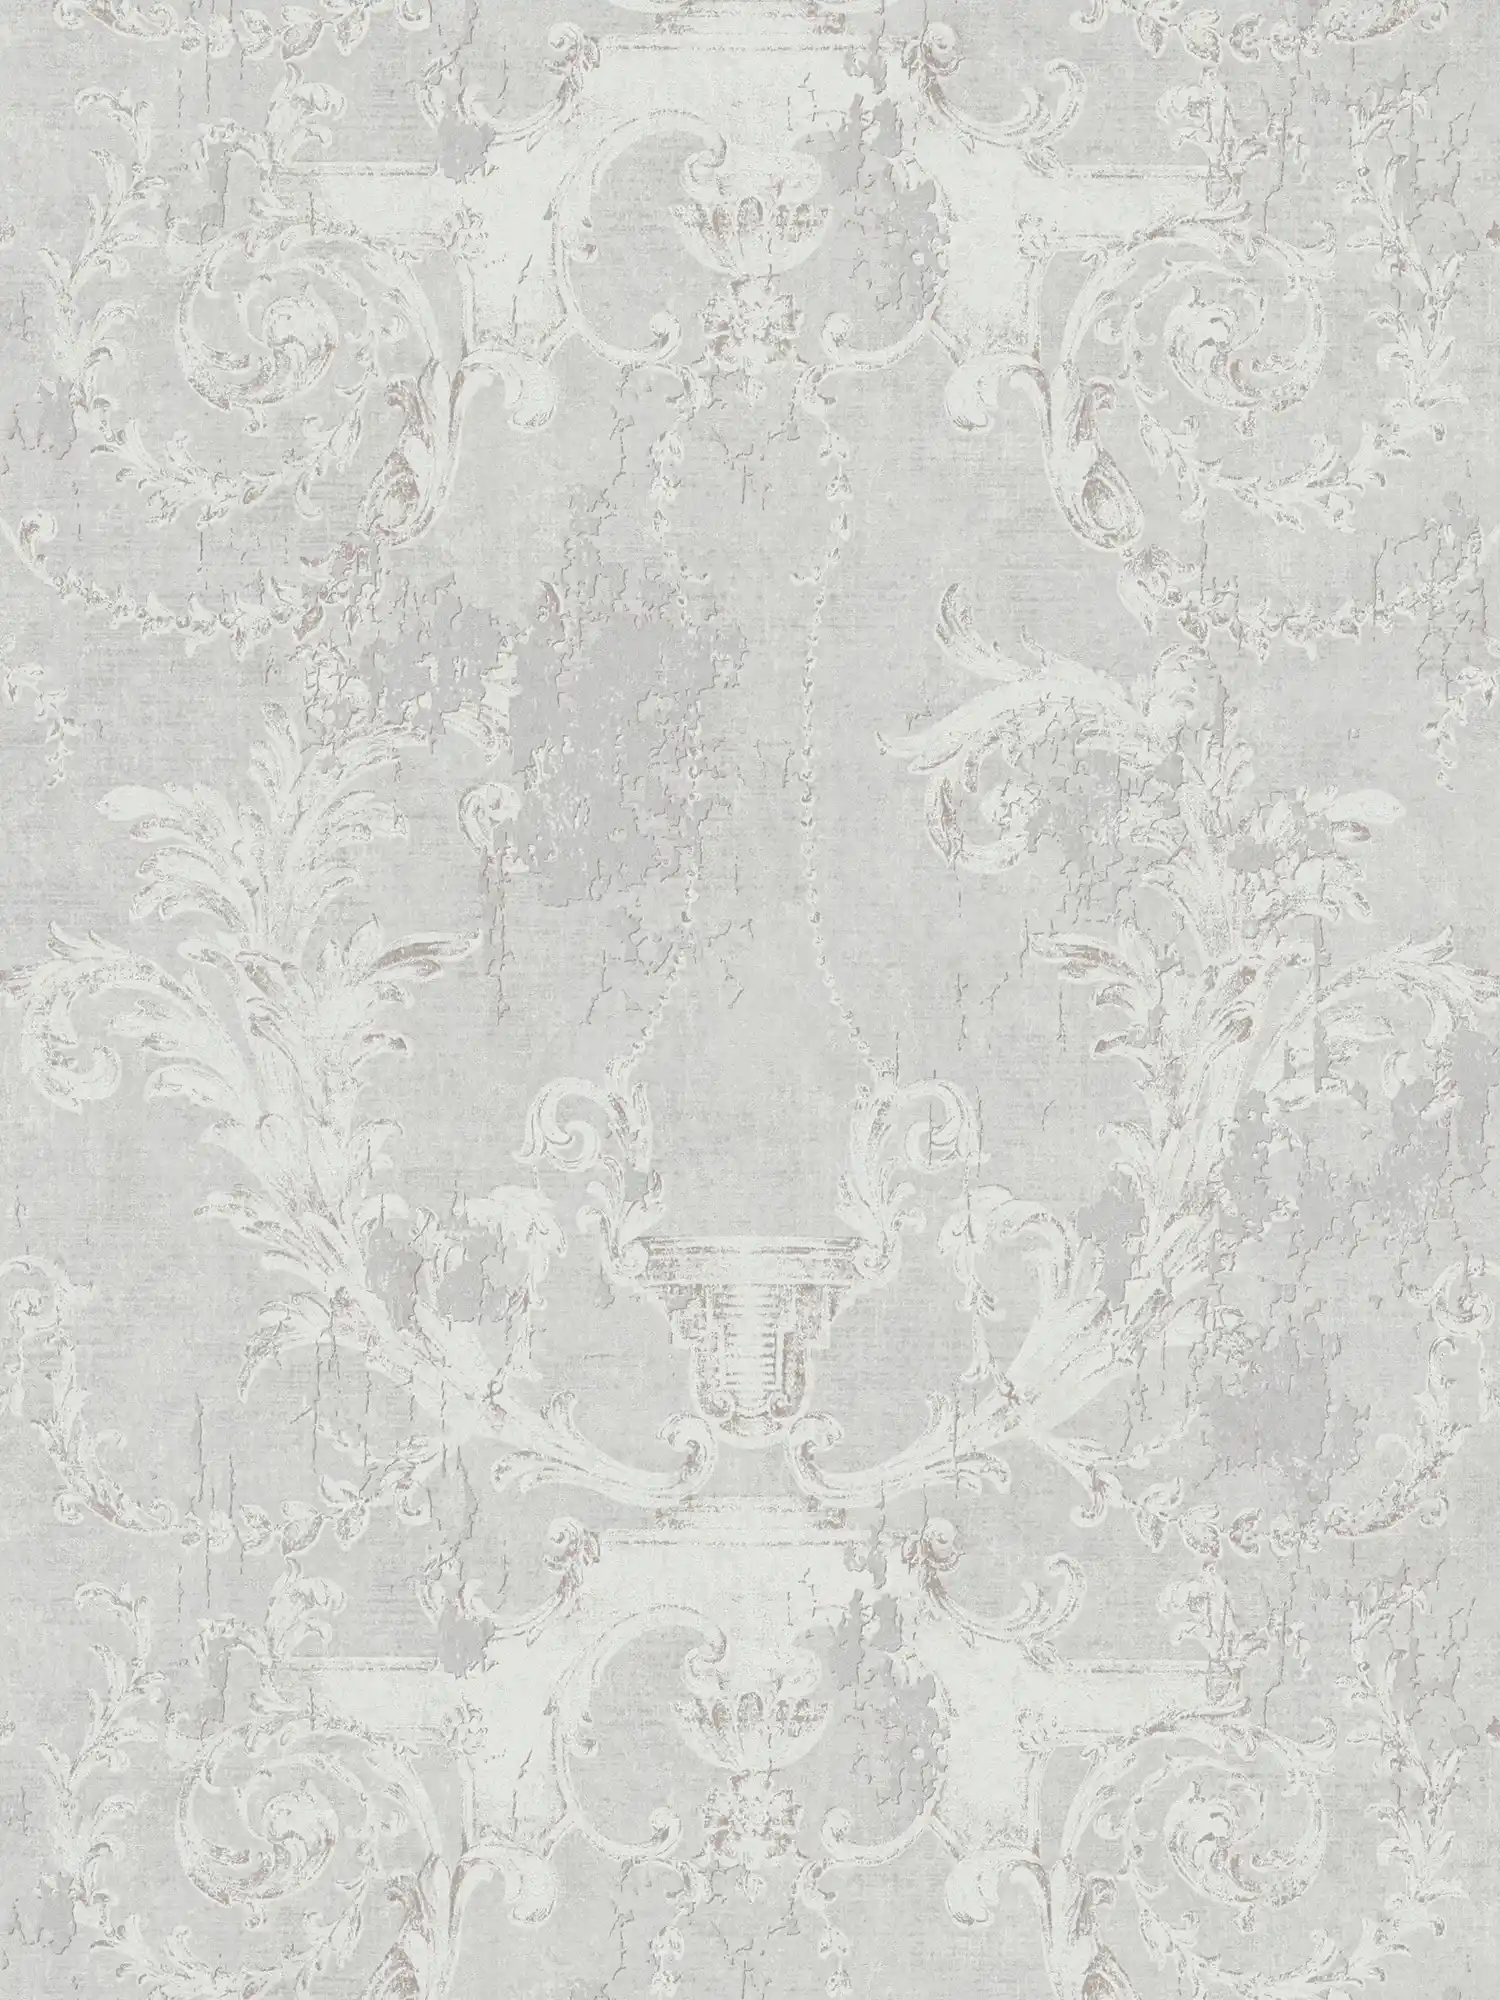 Non-woven wallpaper historical ornaments & used look - grey
